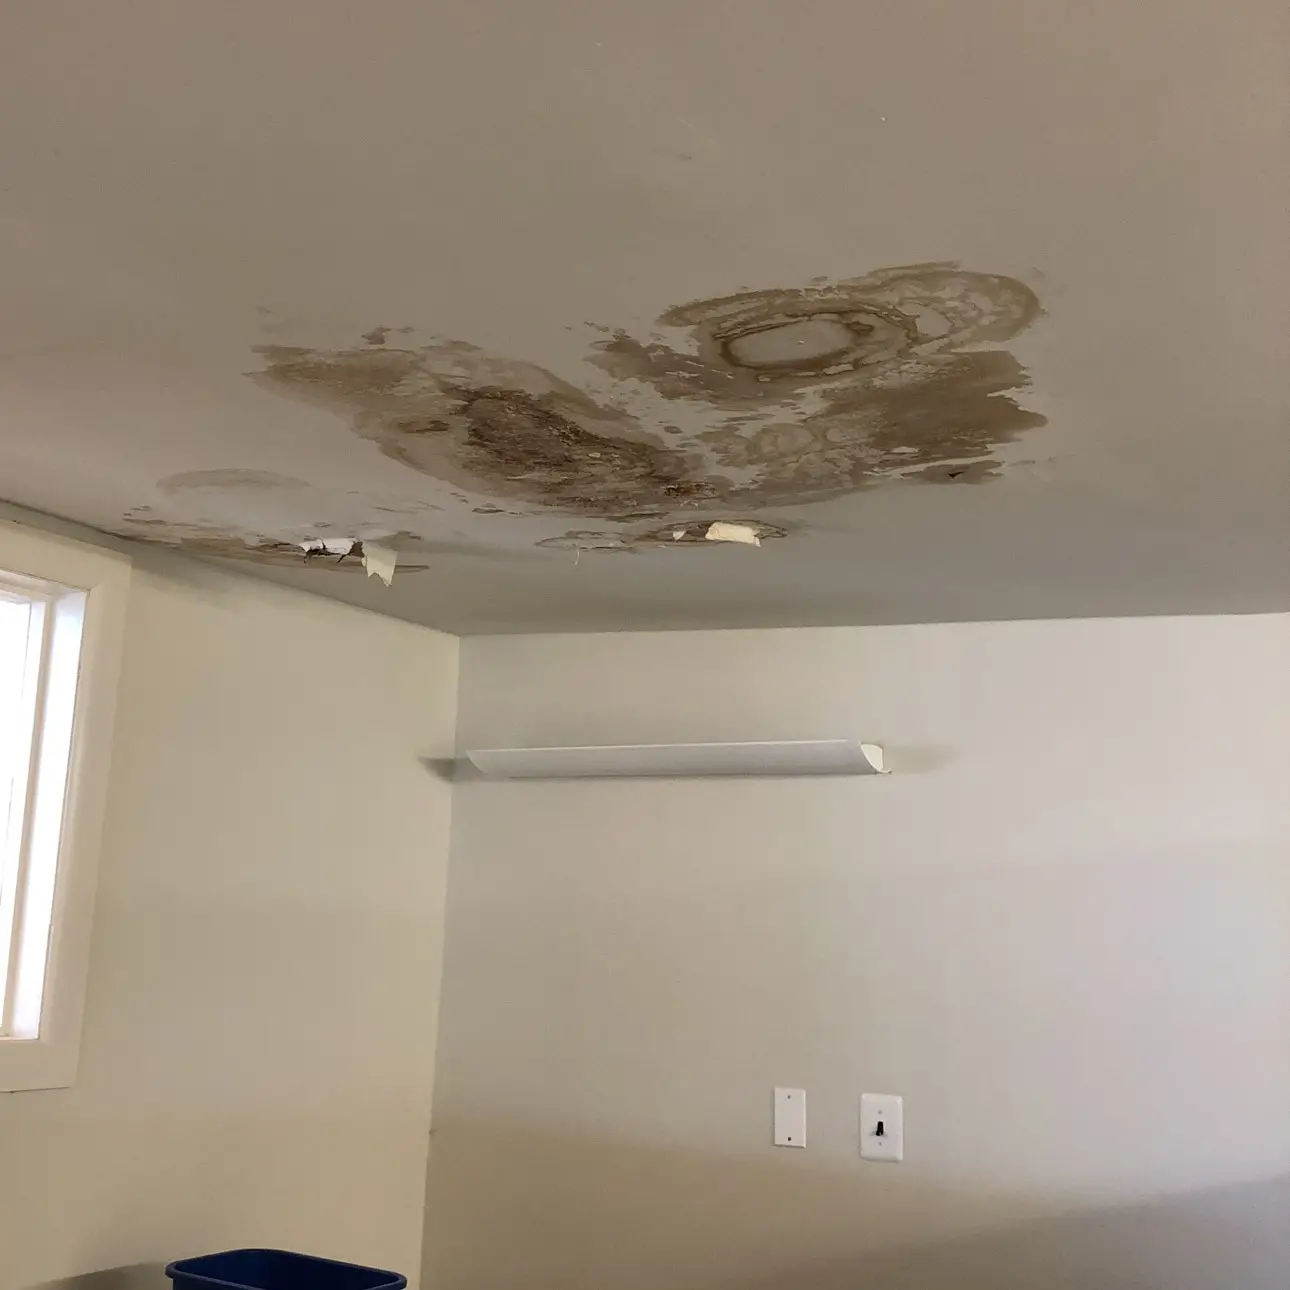 Hidden Mold Growth And Water Damage Caused By Ongoing What Leaks